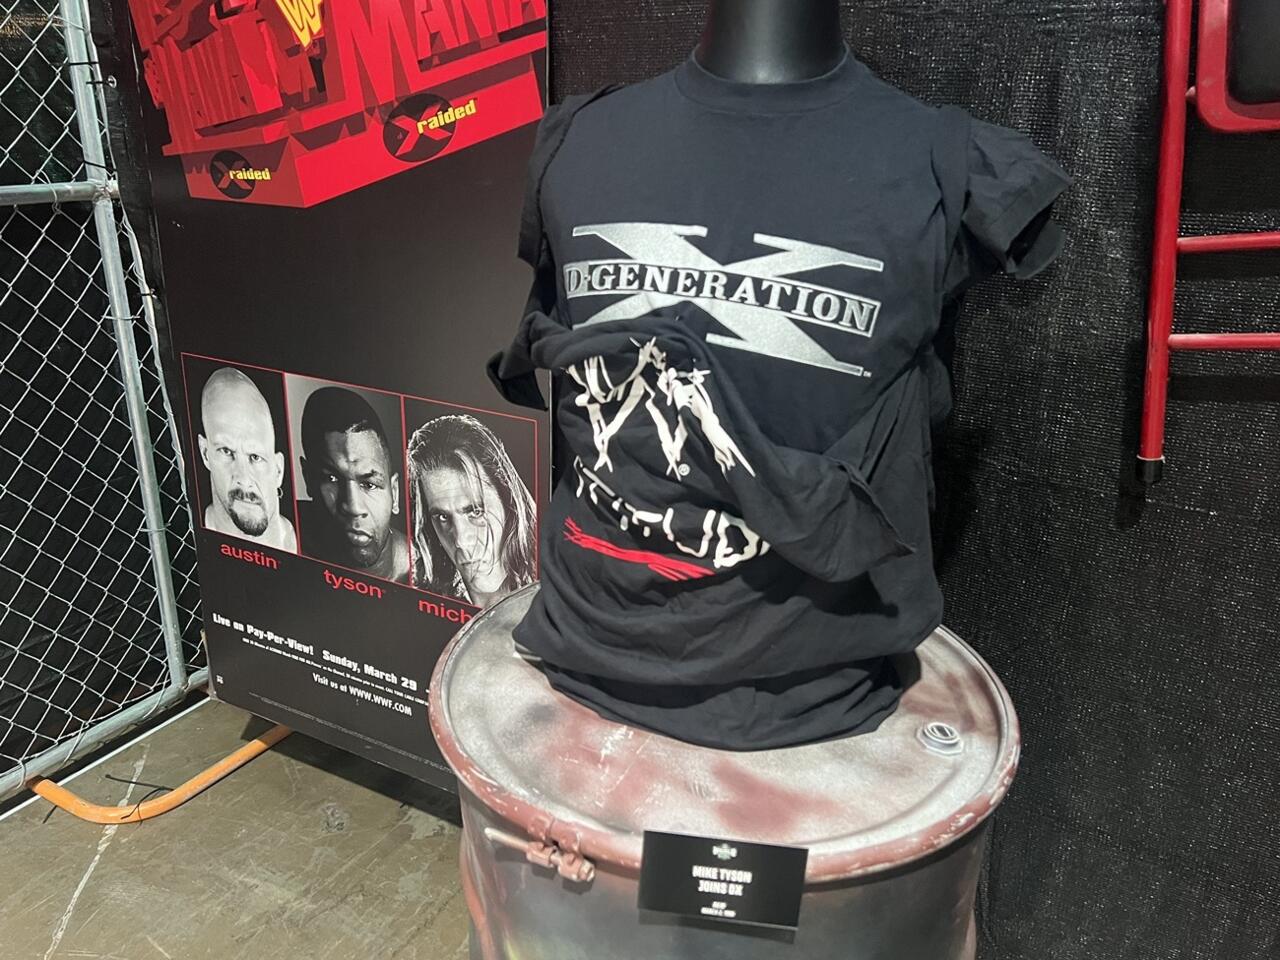 Mike Tyson's DX and WWE shirts